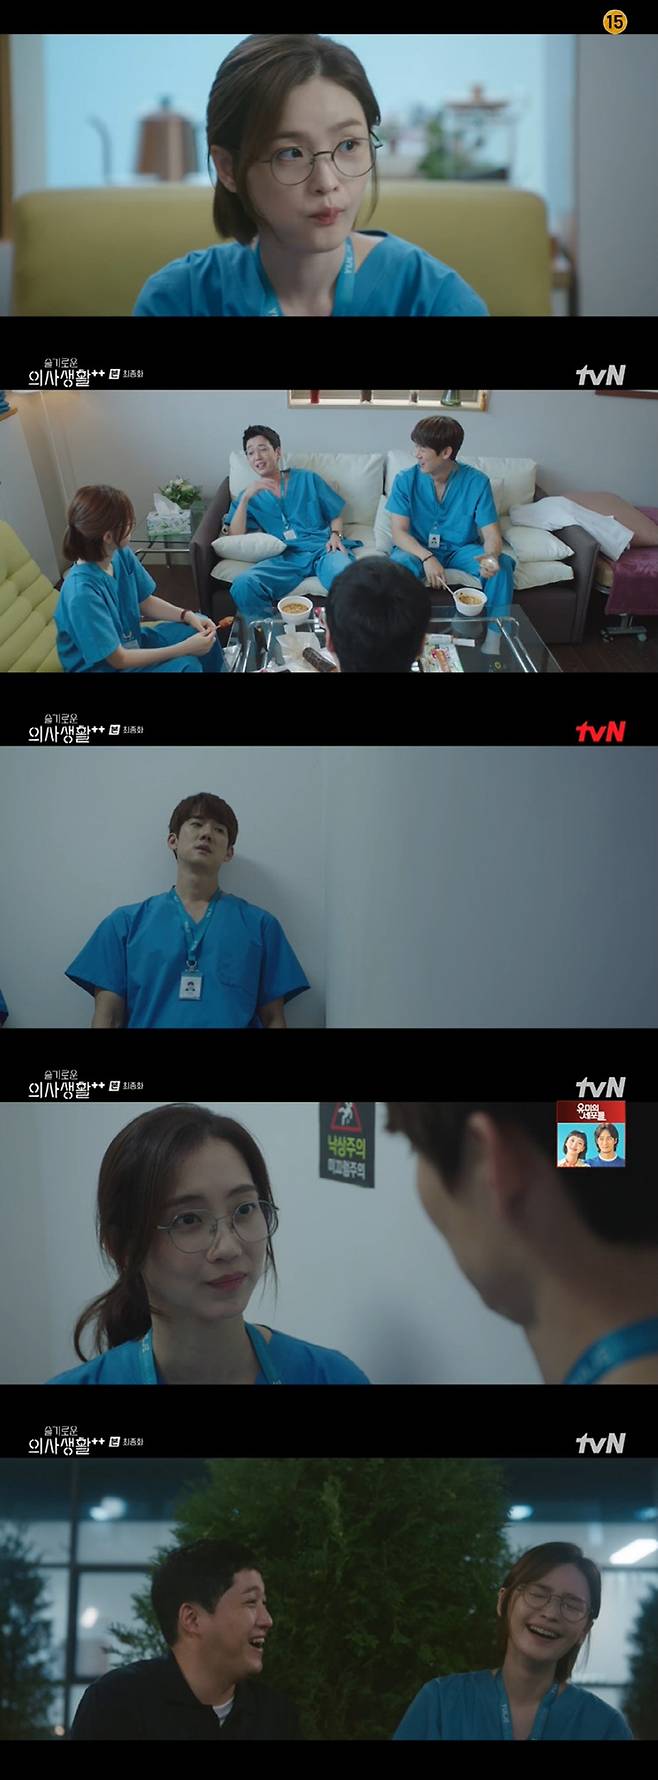 Suluisaeng 2 ended by collecting all rice cakes.In the TVN Thursday drama Spicy Doctor Life 2 broadcasted on the 16th, the last story of 99z was drawn.Lee Ik-joon (Cho Jeong-seok) and Chae Song-hwa (Jeonmido) who developed into lovers by confirming each others minds. Lee Ik-joon put coffee in Chae Song-hwas lab and said, It seems to be over by evening.Ill see you later, he said, adding to his admiration.Kim Joon-wan (Jung Kyung-ho) suggested 99z go to a karaoke room at Weekend, and Yang Seok-hyung (Kim Dae-myung) said he had an appointment at Weekend.It may have been a promise with Chu Min-ha (An Eun-jin), but the members who did not know it were tarnished, Do you meet your mother at Weekend? Kim Joon-wan told Chae Song-hwa, You and Ik-jun have no promises?We have a date too, I met Ik Jun and Weekend and decided to eat and walk together, Chae Songhwa said honestly.But Ahn Jung-won (Yoo Yeon-Seok), Yang Seok-hyung and Kim Joon-wan didnt mind when didnt you do it?In particular, Kim Joon-wan said, When did Lee Ik-sun (Kwak Sun-Young) see the two last time and date them?I think theyre really dating, too, he laughed, and Chae Song-hwa said, Were really dating. But 99s did not believe it.Ahn did not hide his worries ahead of the small intestine transplant. Shin Hyun-bin encouraged the stable and promised to talk to Weekend.Yang Seok-hyung was congratulated and cheered on Chae Song-hwa for starting his devotion with Chu Min-ha. Yang Seok-hyung said, I still tell my mother today.And I have an insurance policy in case I do not know, but I want to tell you that. Yang Seok-hyung, who later believed in Chae Song-hwa and Lee Ik-joons devotion, said, It was so good.Im so good, he said, cheering on Chae Song-hwa.The two men, who became lovers in the 20-year-old Friend, felt awkward to feed each other and went back naturally.Cho Young-hye (Moon Hee-kyung) told Jeongrosa (Kim Hae-sook) that Yang Seok-hyung had a woman friend.Cho Young-hye, who believes that Yang Seok-hyung will not go to United States of America training because of the woman Friend, vowed, I will do really well.Lee Ik-sun joined Chae Song-hwa and Lee Ik-jun on a date, when Kim Joon-wan called Chae Song-hwa.Eventually, Kim Joon-wan joined and the awkward meal was completed.My mother wants to meet me, said Ahn, who said, I told her that my daughter had a loved one, so she wanted to eat right away. Ahn nodded.Ahn Jung-won also learned about the devotion of Yang Seok-hyung and Chu Min-ha through Jeongrosa. Ahn Jung-won asked, Do you know me only? Yang Seok-hyung said, I will tell Weekend to Ik Jun and Jun Wan.The 99s were each undergoing difficult surgery. Lee had successfully completed the surgery, but the prognosis of the patient in charge of Chae Songhwa was not good.I do not think I can pass it tonight. But fortunately, the patient returned to consciousness.In front of the 99s gathered, Ahn Jung-won said he will go to United States of America for a year with the early winter of next year.I want to study more at the hospital, and I can do surgery and research at your hospital, said Ahn. I think I can not go now or I can not.Patients who had been in the hospital for a long time were about to be discharged, and Do Jae-hak (Jeong Mun-seong) also caught a charter fraud suspect in two years.The mother who lost her child was filled with good news at Yulje Hospital, with a new angel coming.Do Jae-hak told Kim Joon-wan, Ive met a family of fraud suspects. The con man was caught cheating again.If we agree, we agreed to a suspended sentence.Kim Joon-wan said, Consensus is not important, but you should get money. Do Jae-hak poured tears of emotion, saying, I received the money.Kim Joon-wan went to Lee Ik-suns military unit and asked, Youre not here to see me, are you? Kim Joon-wan offered the excuse of coming for a snack.Lee Ik-sun wept and Kim Joon-wan embraced Lee Ik-sun.Four months later, Do Jae-haks wife, who was battling cancer, gave birth to a healthy child.